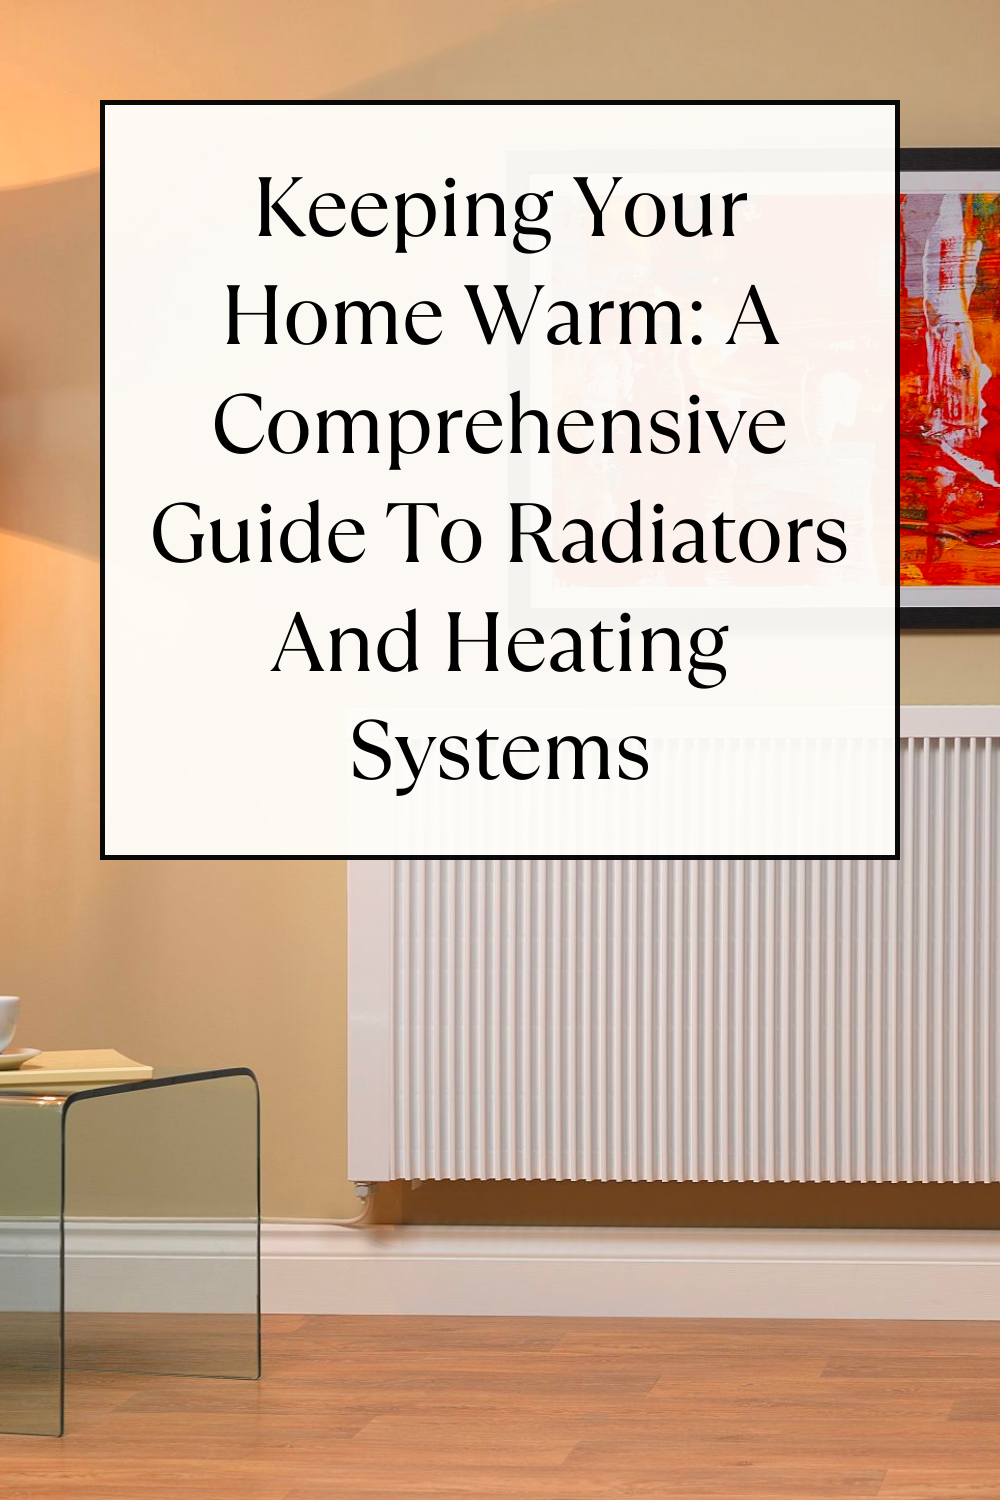 Radiators And Heating Systems